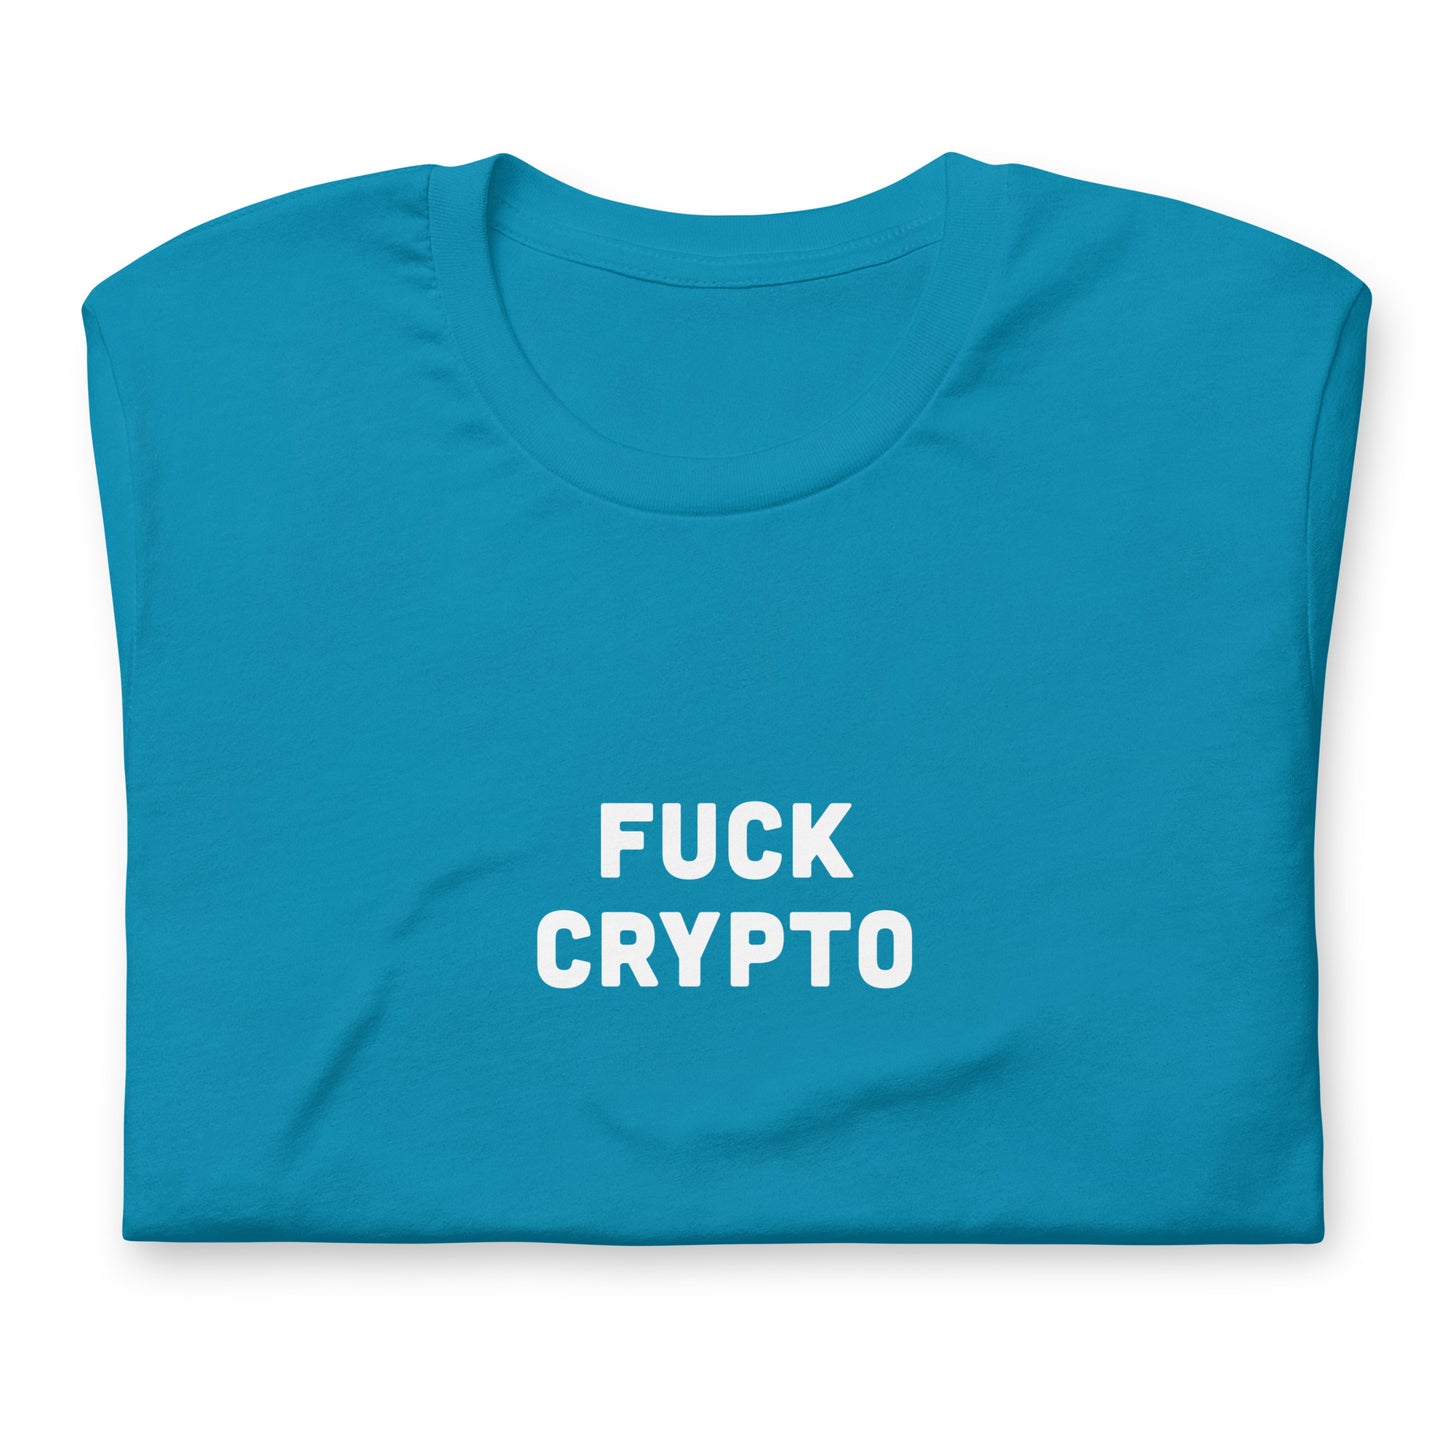 Fuck Crypto T-Shirt Size L Color Navy